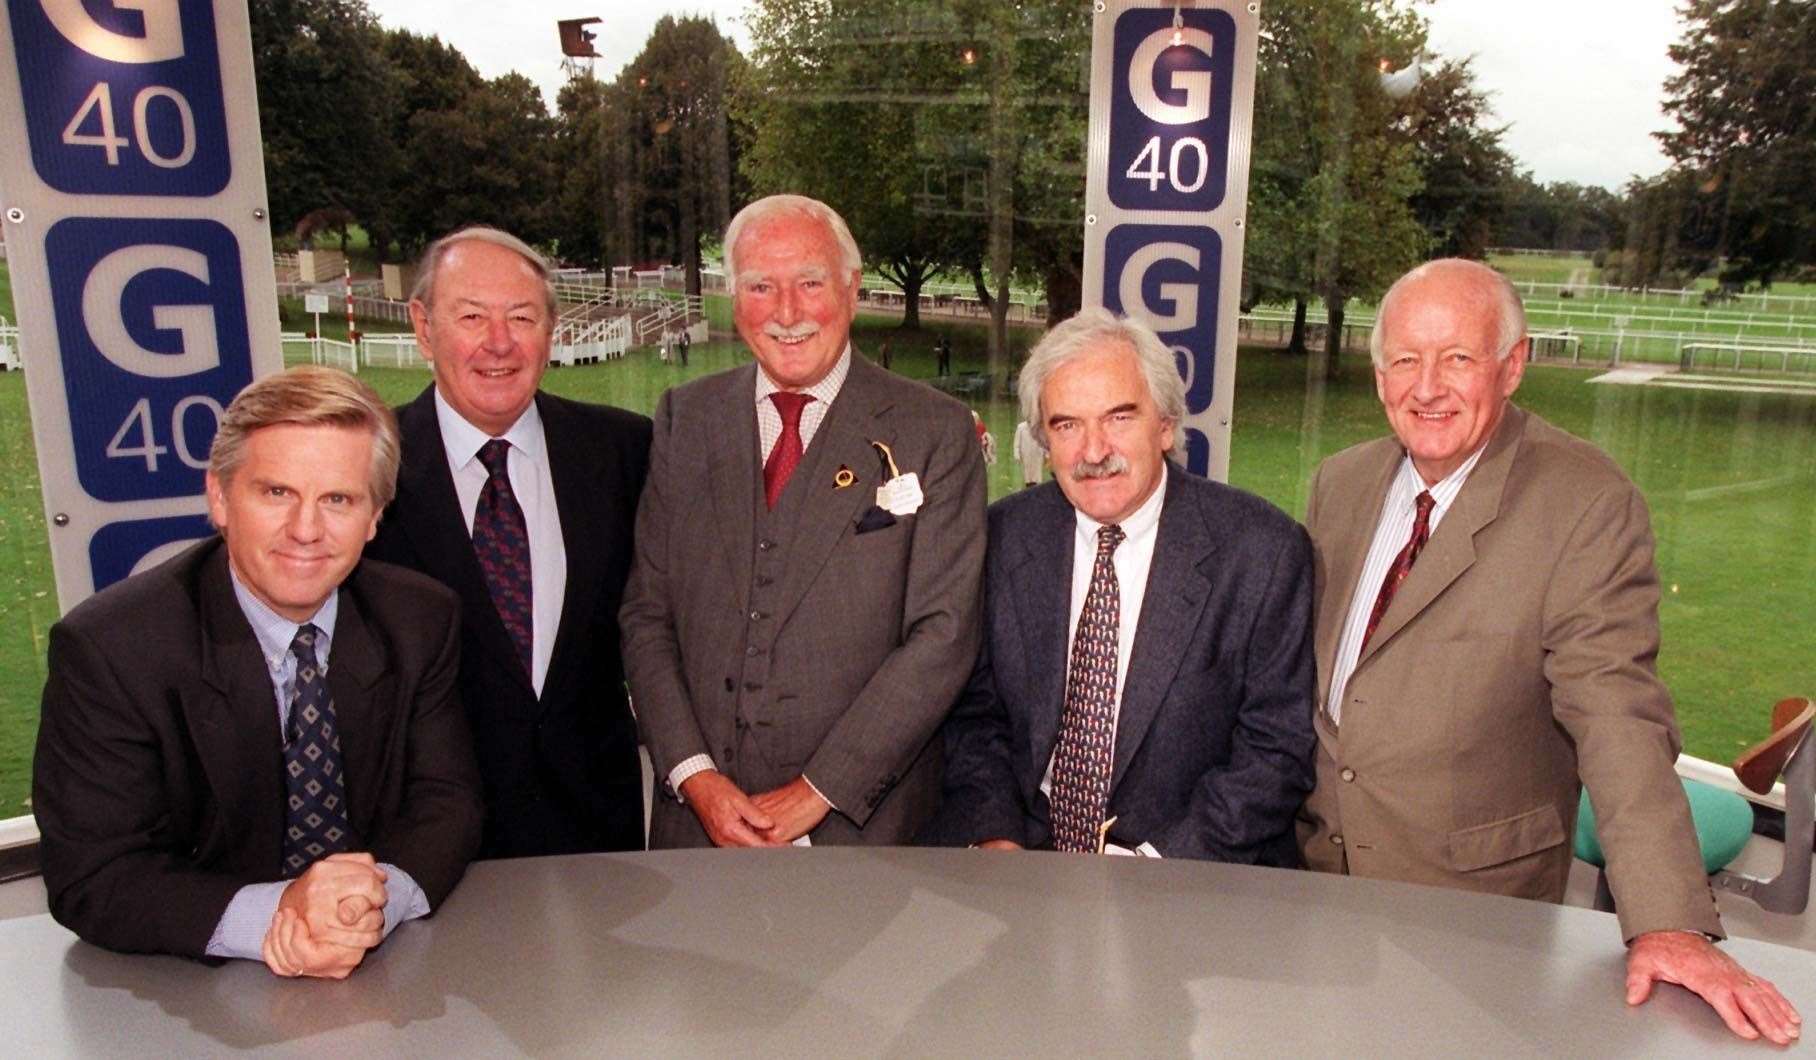 Steve Ryder, David Coleman, Peter Dimmock, Des Lynam and Frank Bough during a celebration for the 40th anniversary of Grandstand (BBC/PA)